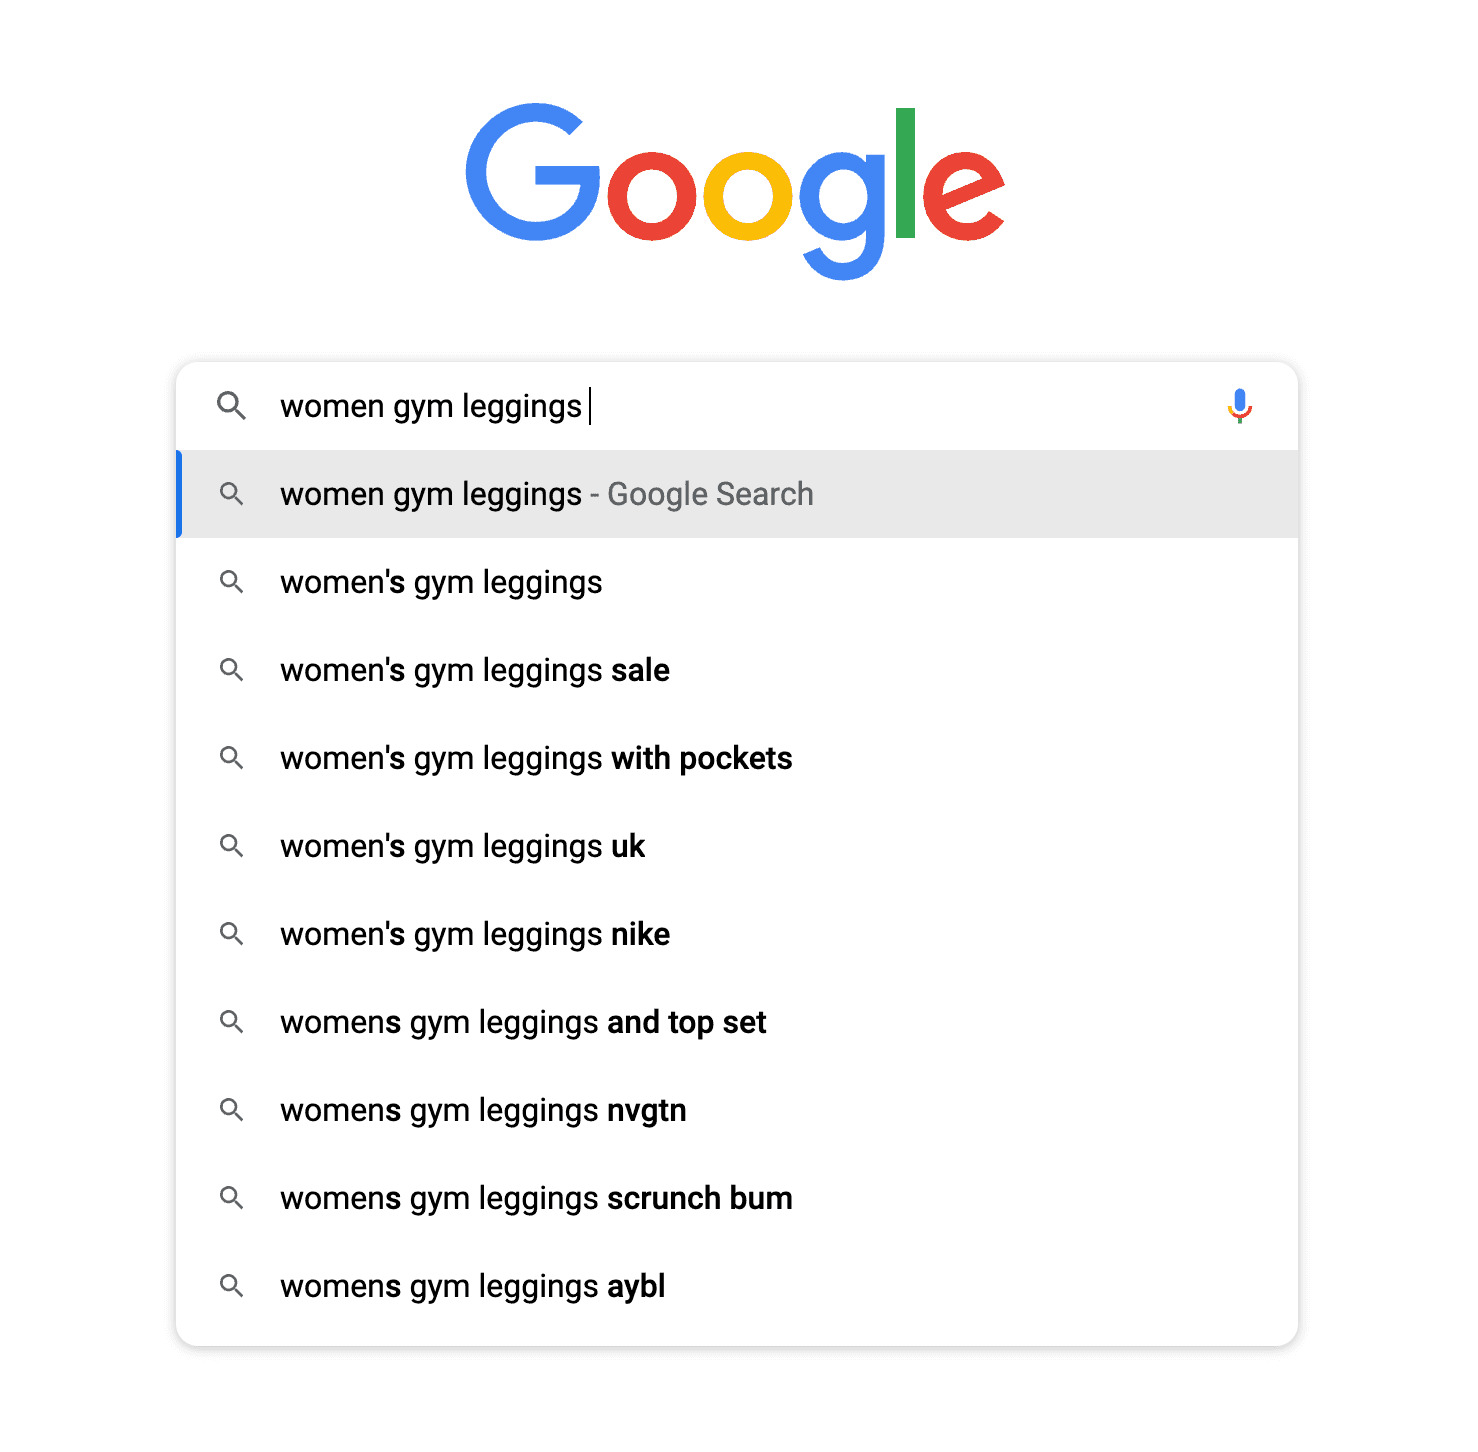 Example of all the suggestions that come up on google when searching for "women gym leggings."